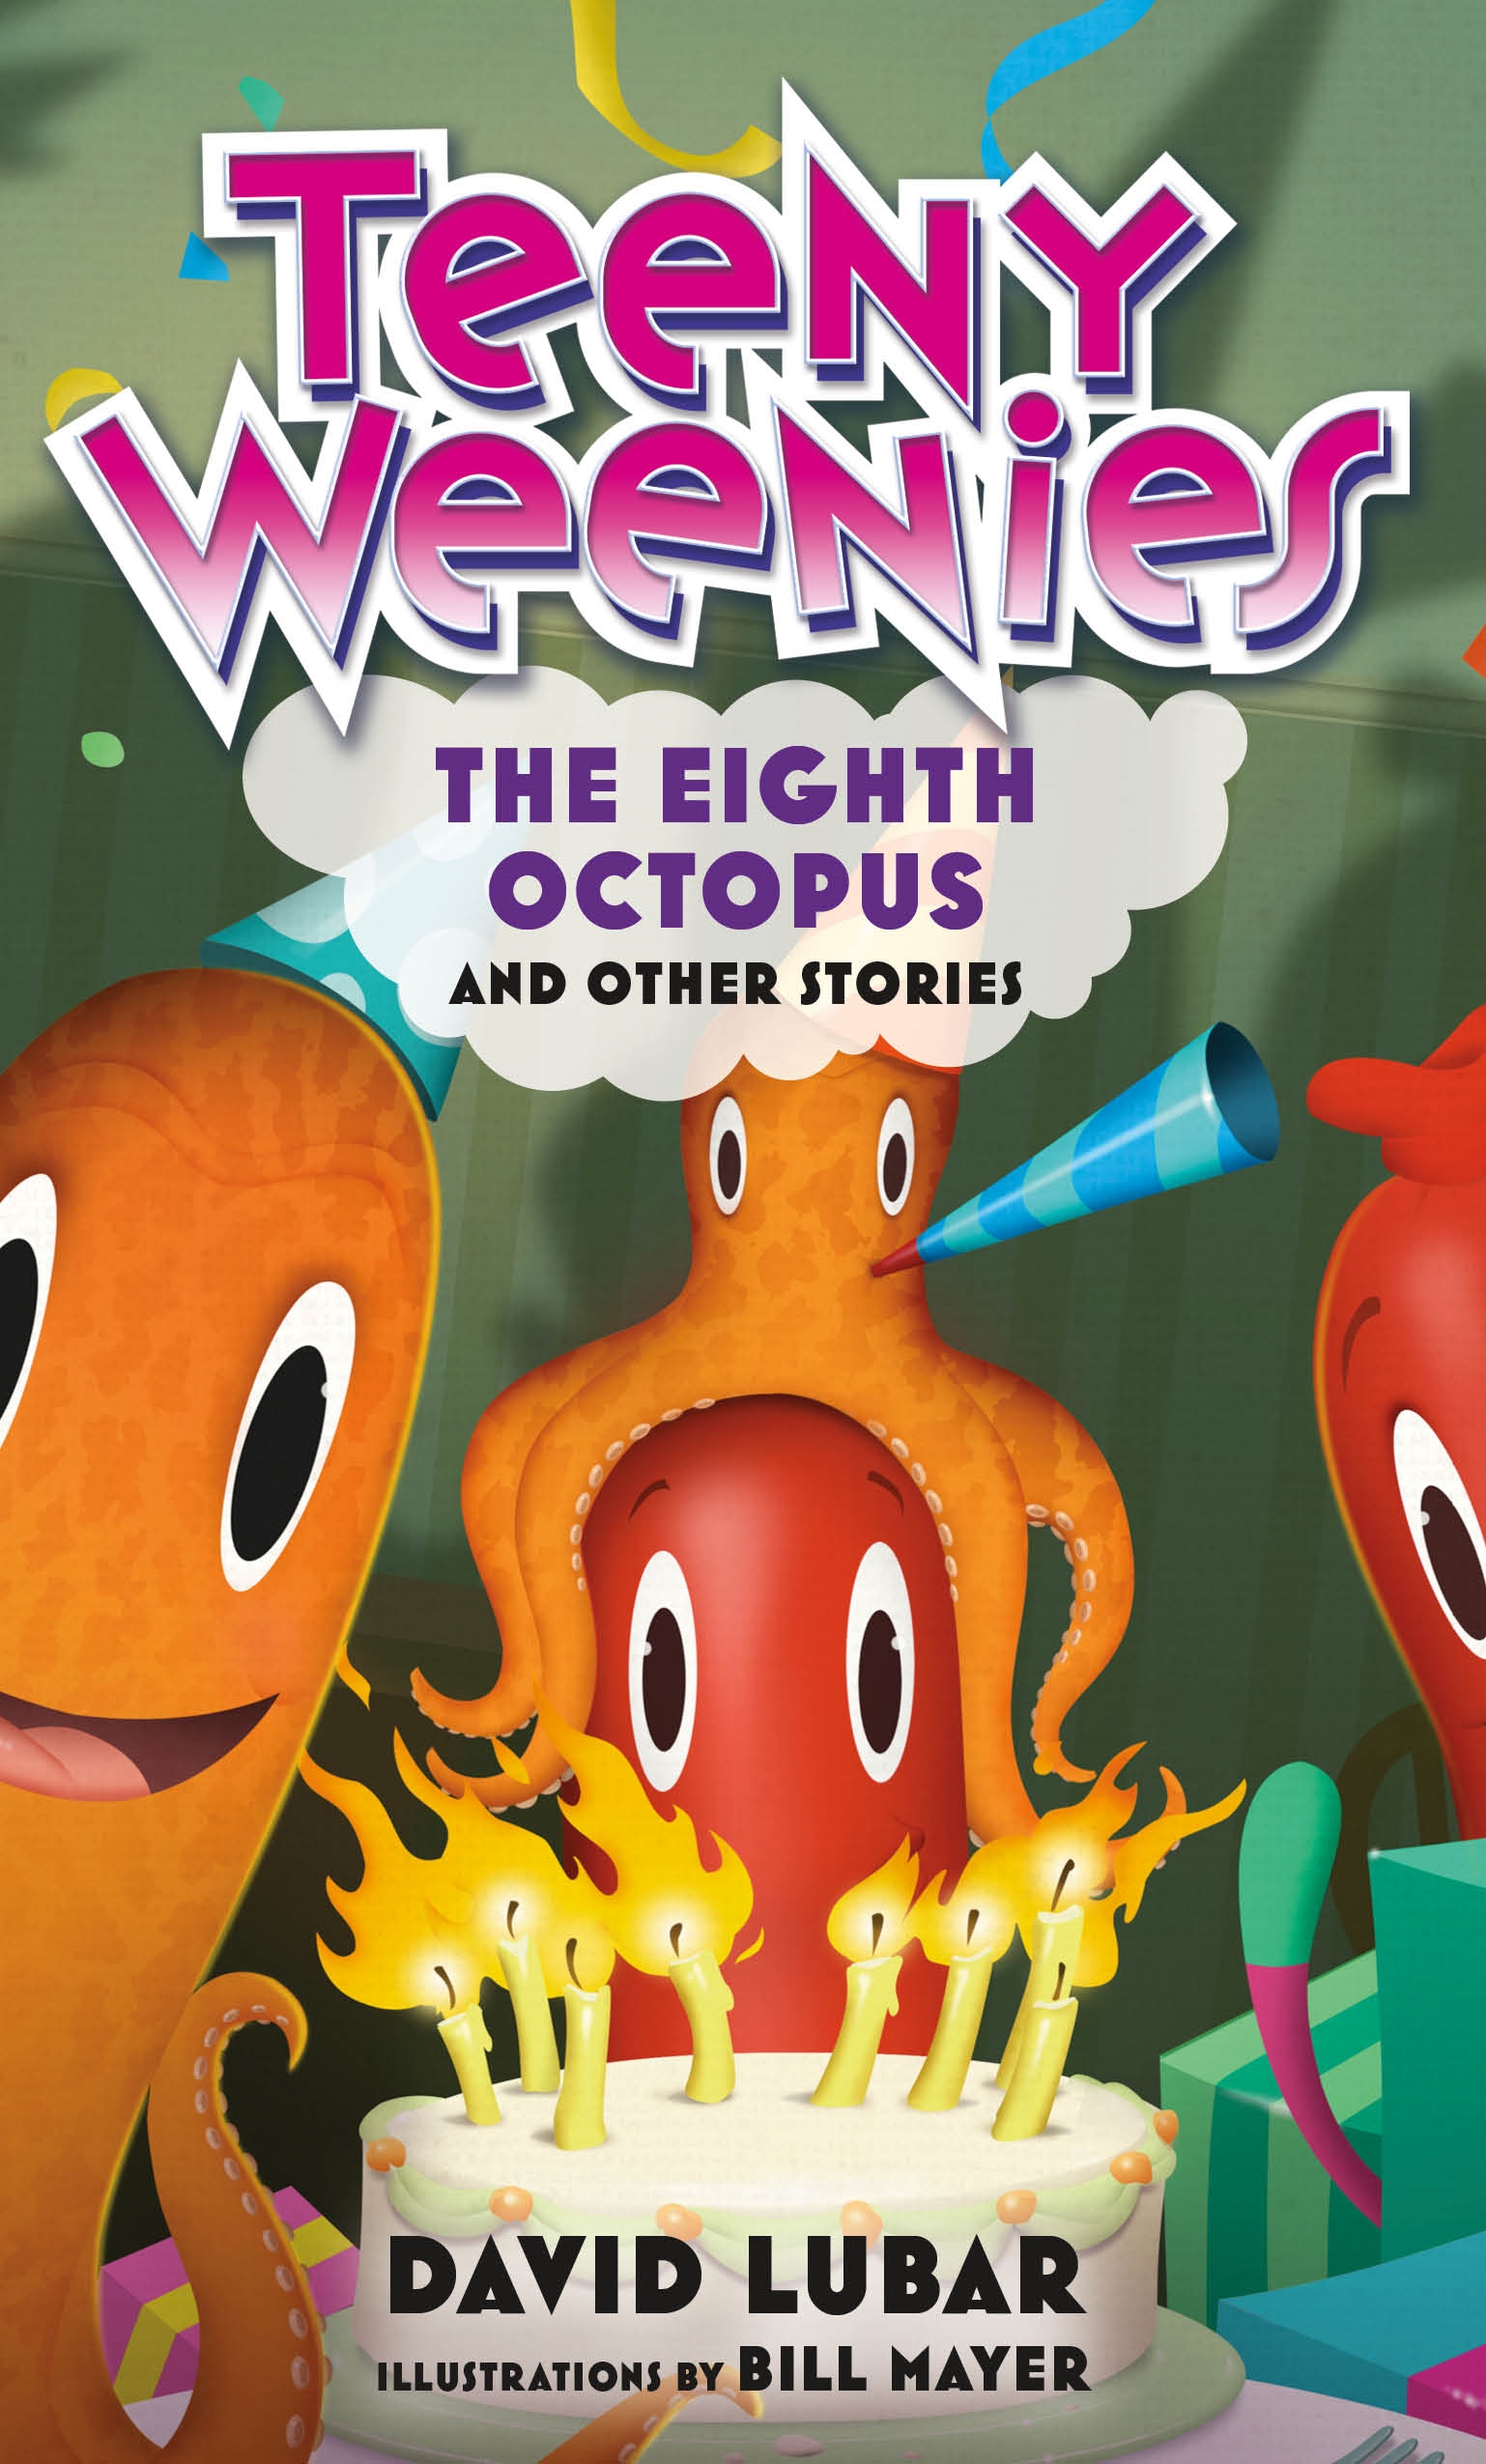 Teeny Weenies: The Eighth Octopus : And Other Stories by David Lubar